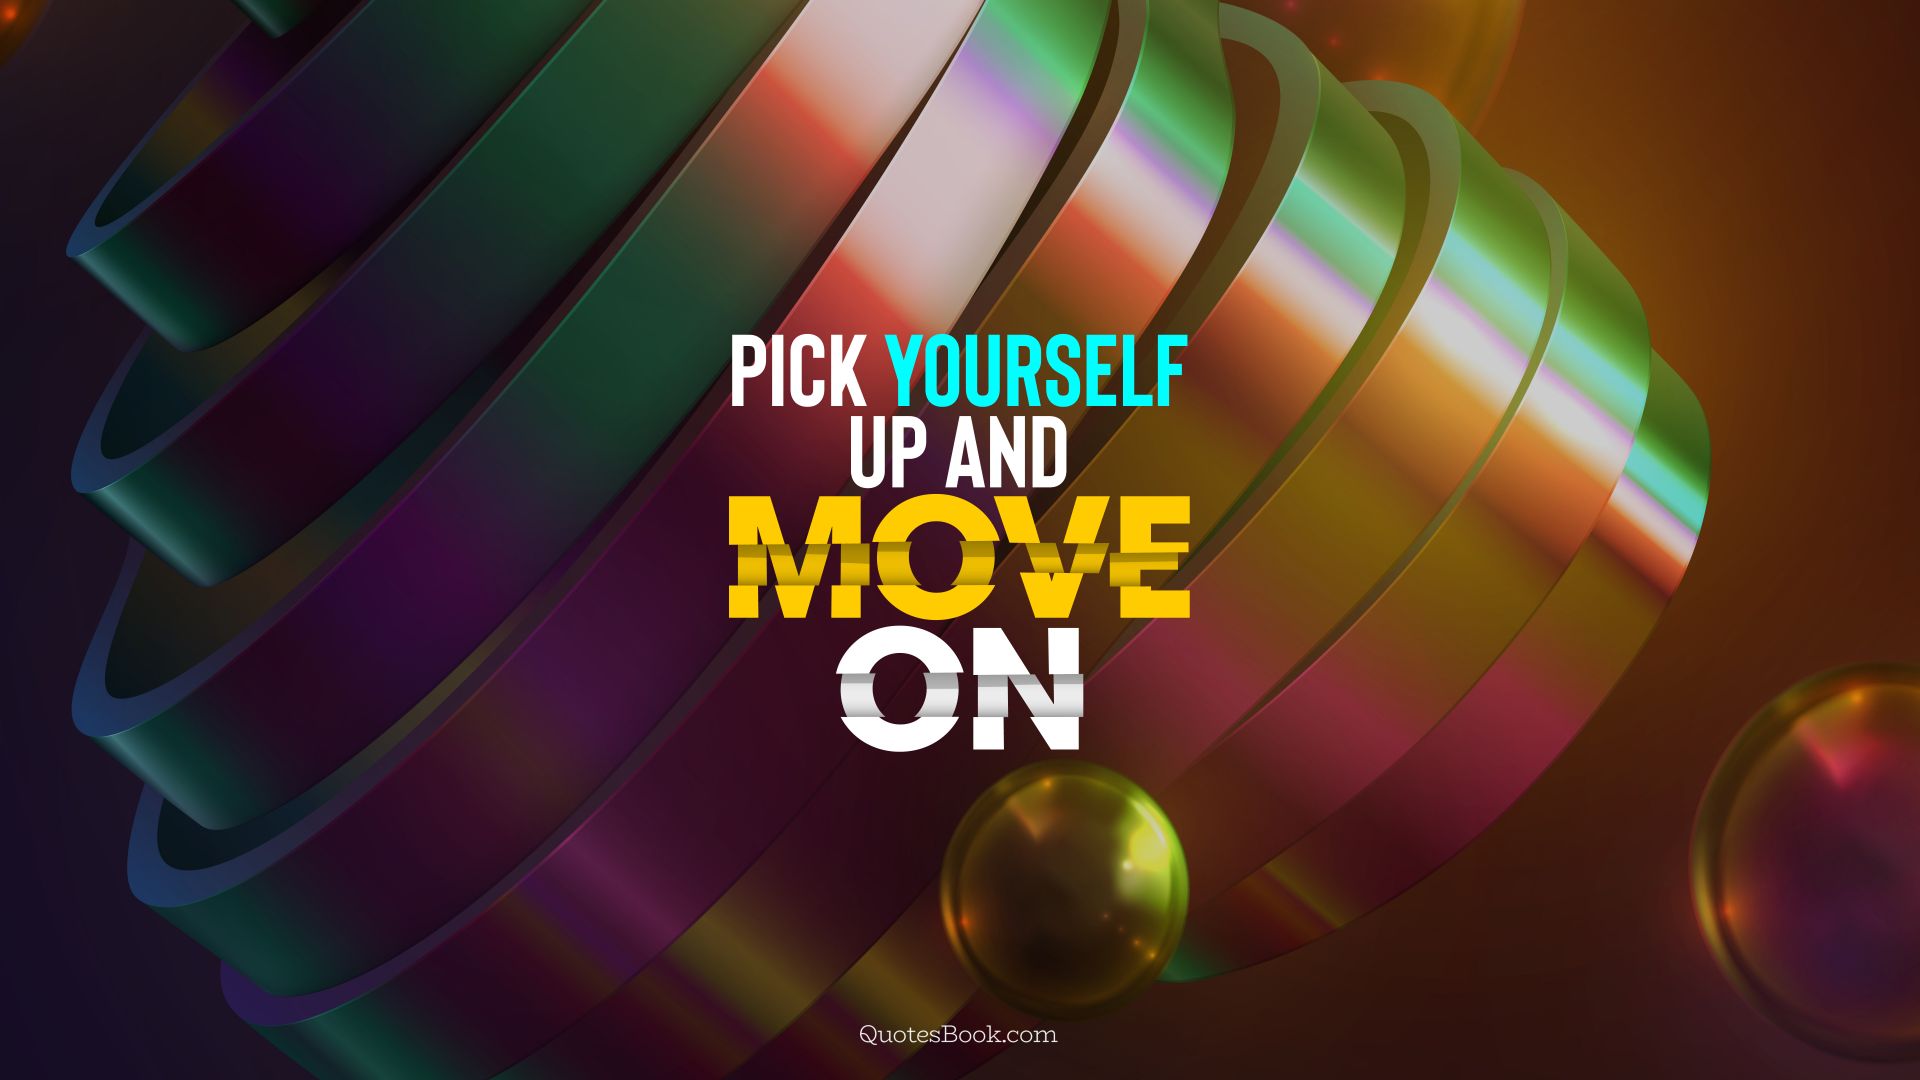 Pick yourself up and move on. - Quote by QuotesBook